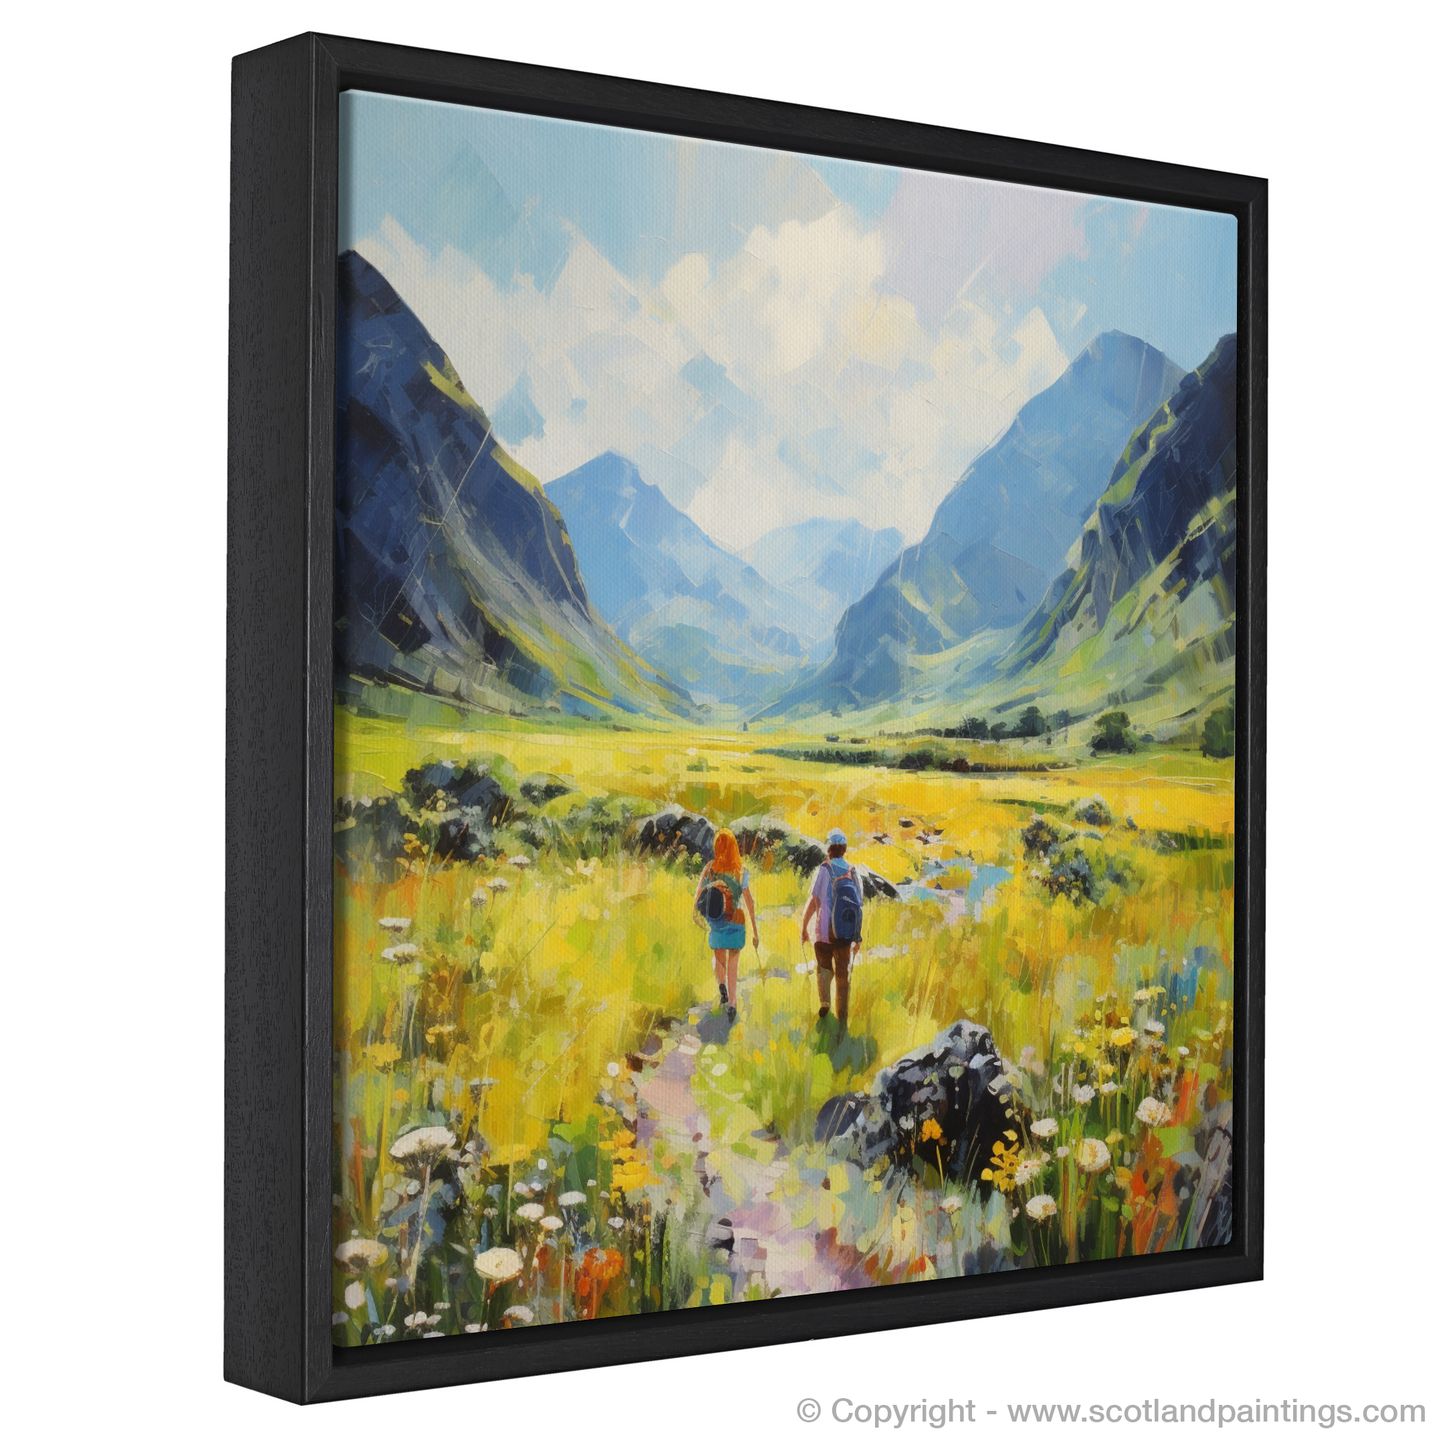 Painting and Art Print of Walkers in Glencoe during summer entitled "Summer Wanderers in the Glens of Scotland".